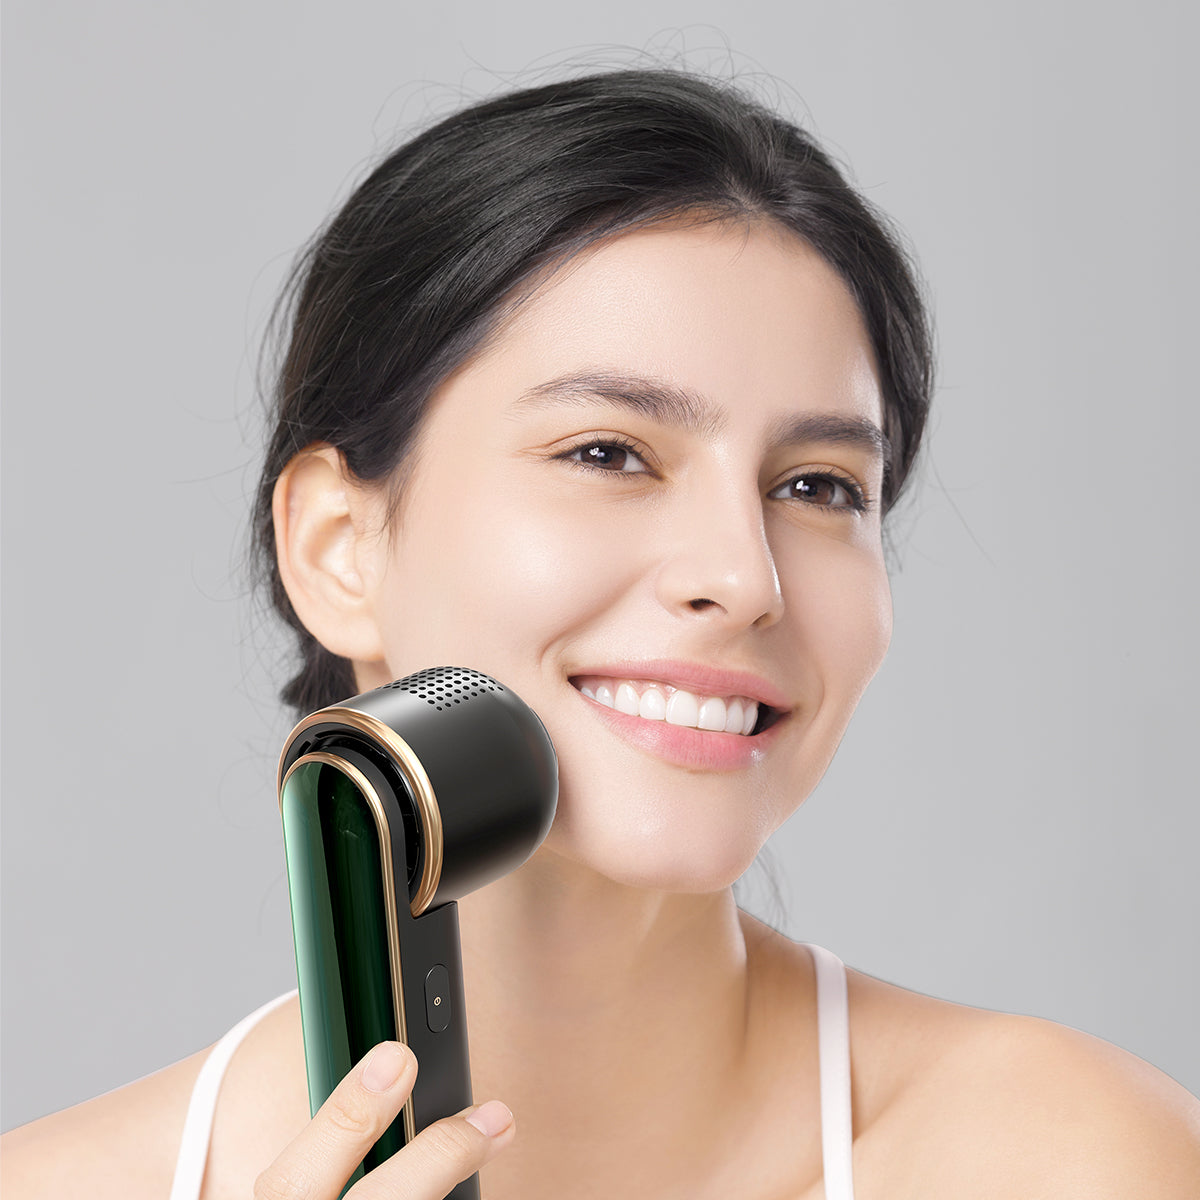 Smiling woman using JOVS Blacken PRO DPL Photofacial Skincare Device for improved skin texture and radiance.